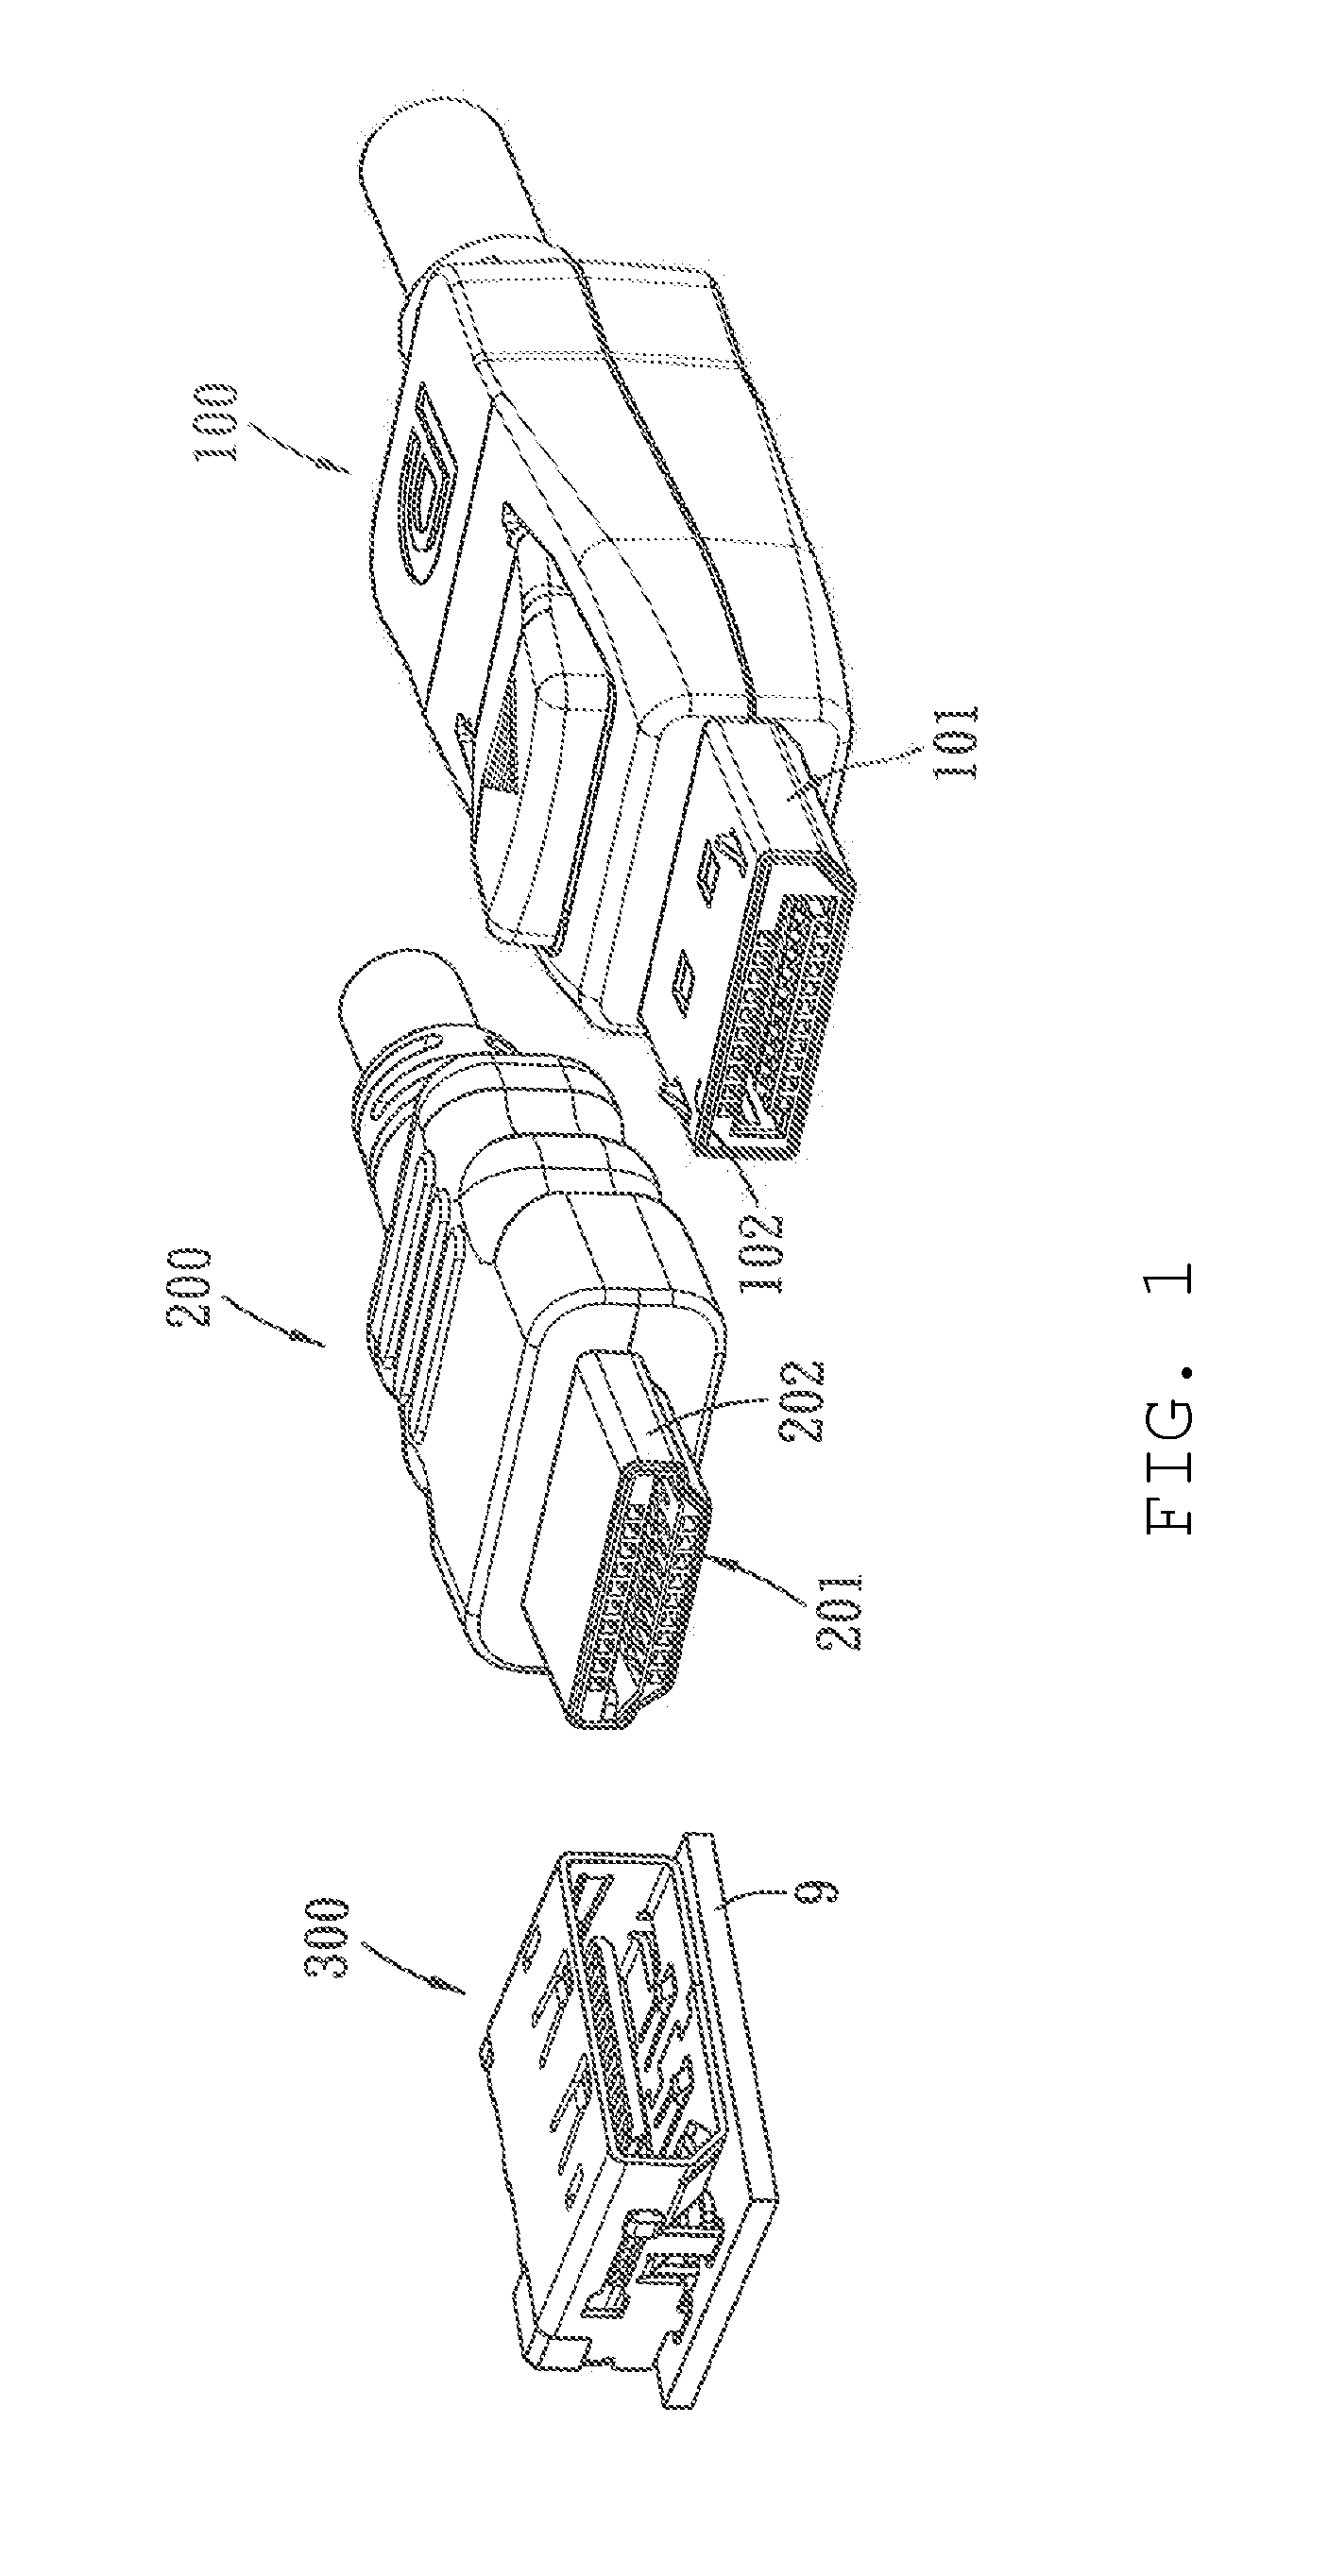 Receptacle connector and connector assembly